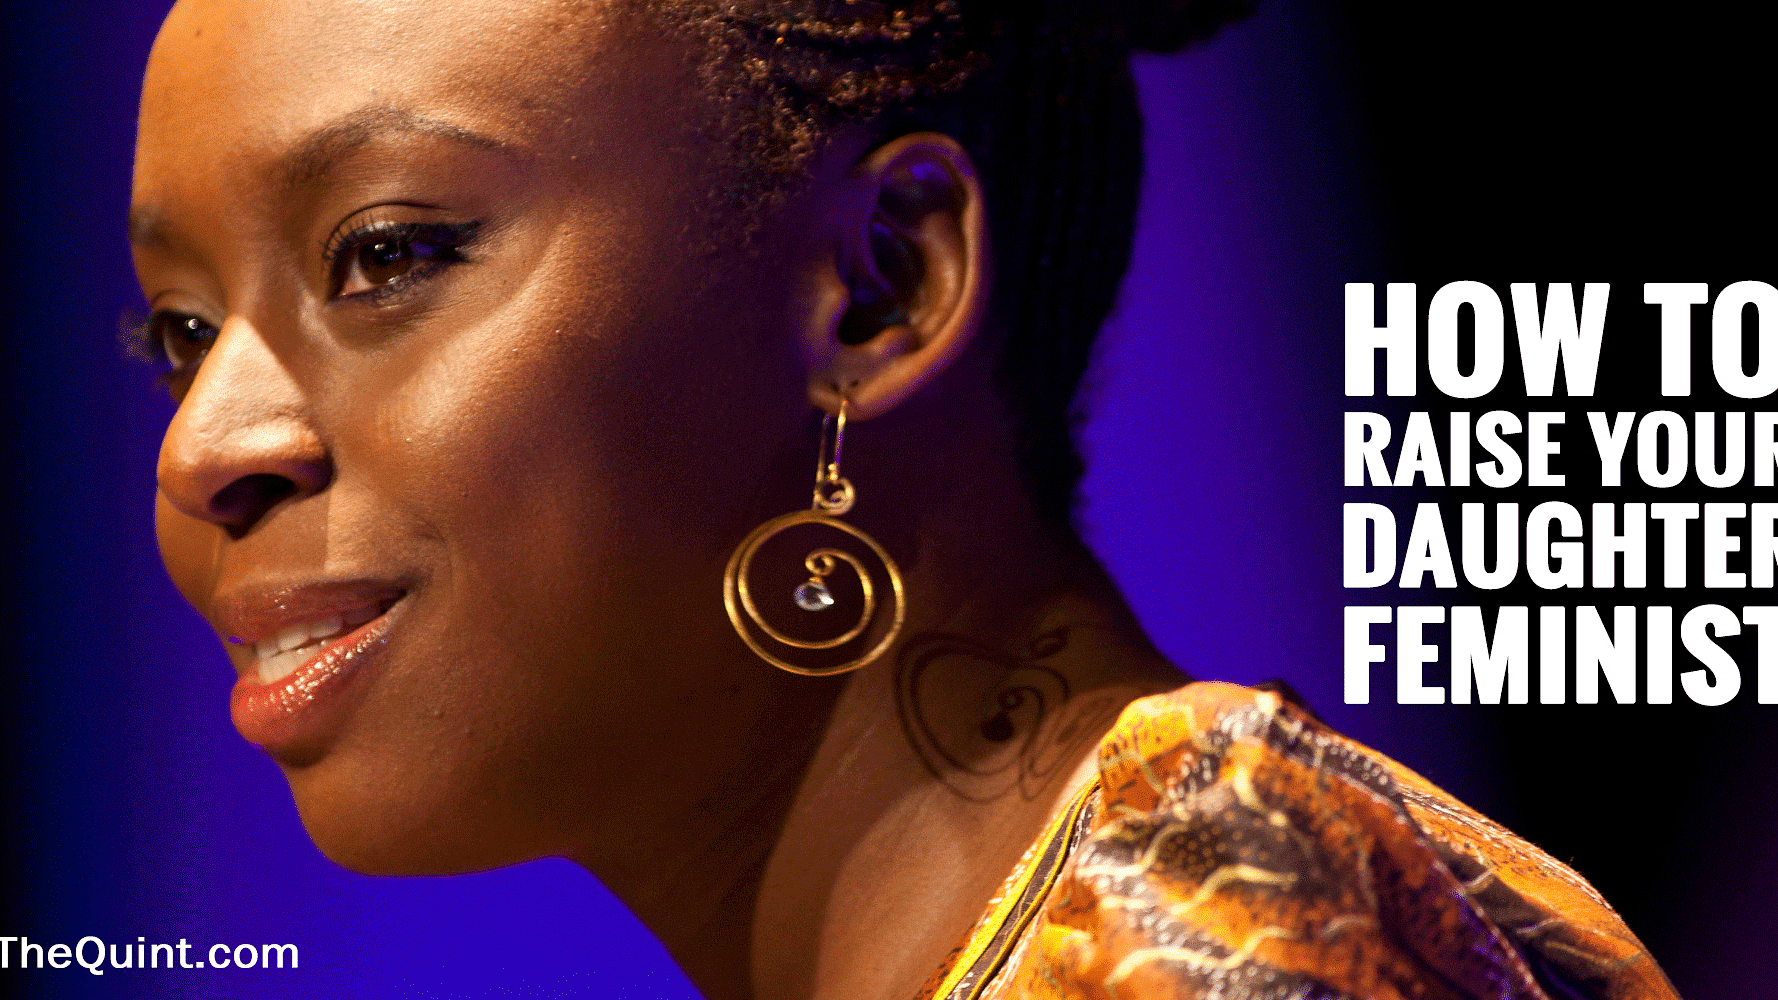 Author Chimamanda Adichie has put out a Facebook post with 15 suggestions on how to ‘raise one’s daughter feminist’. (Photo:<b> The Quint</b>)